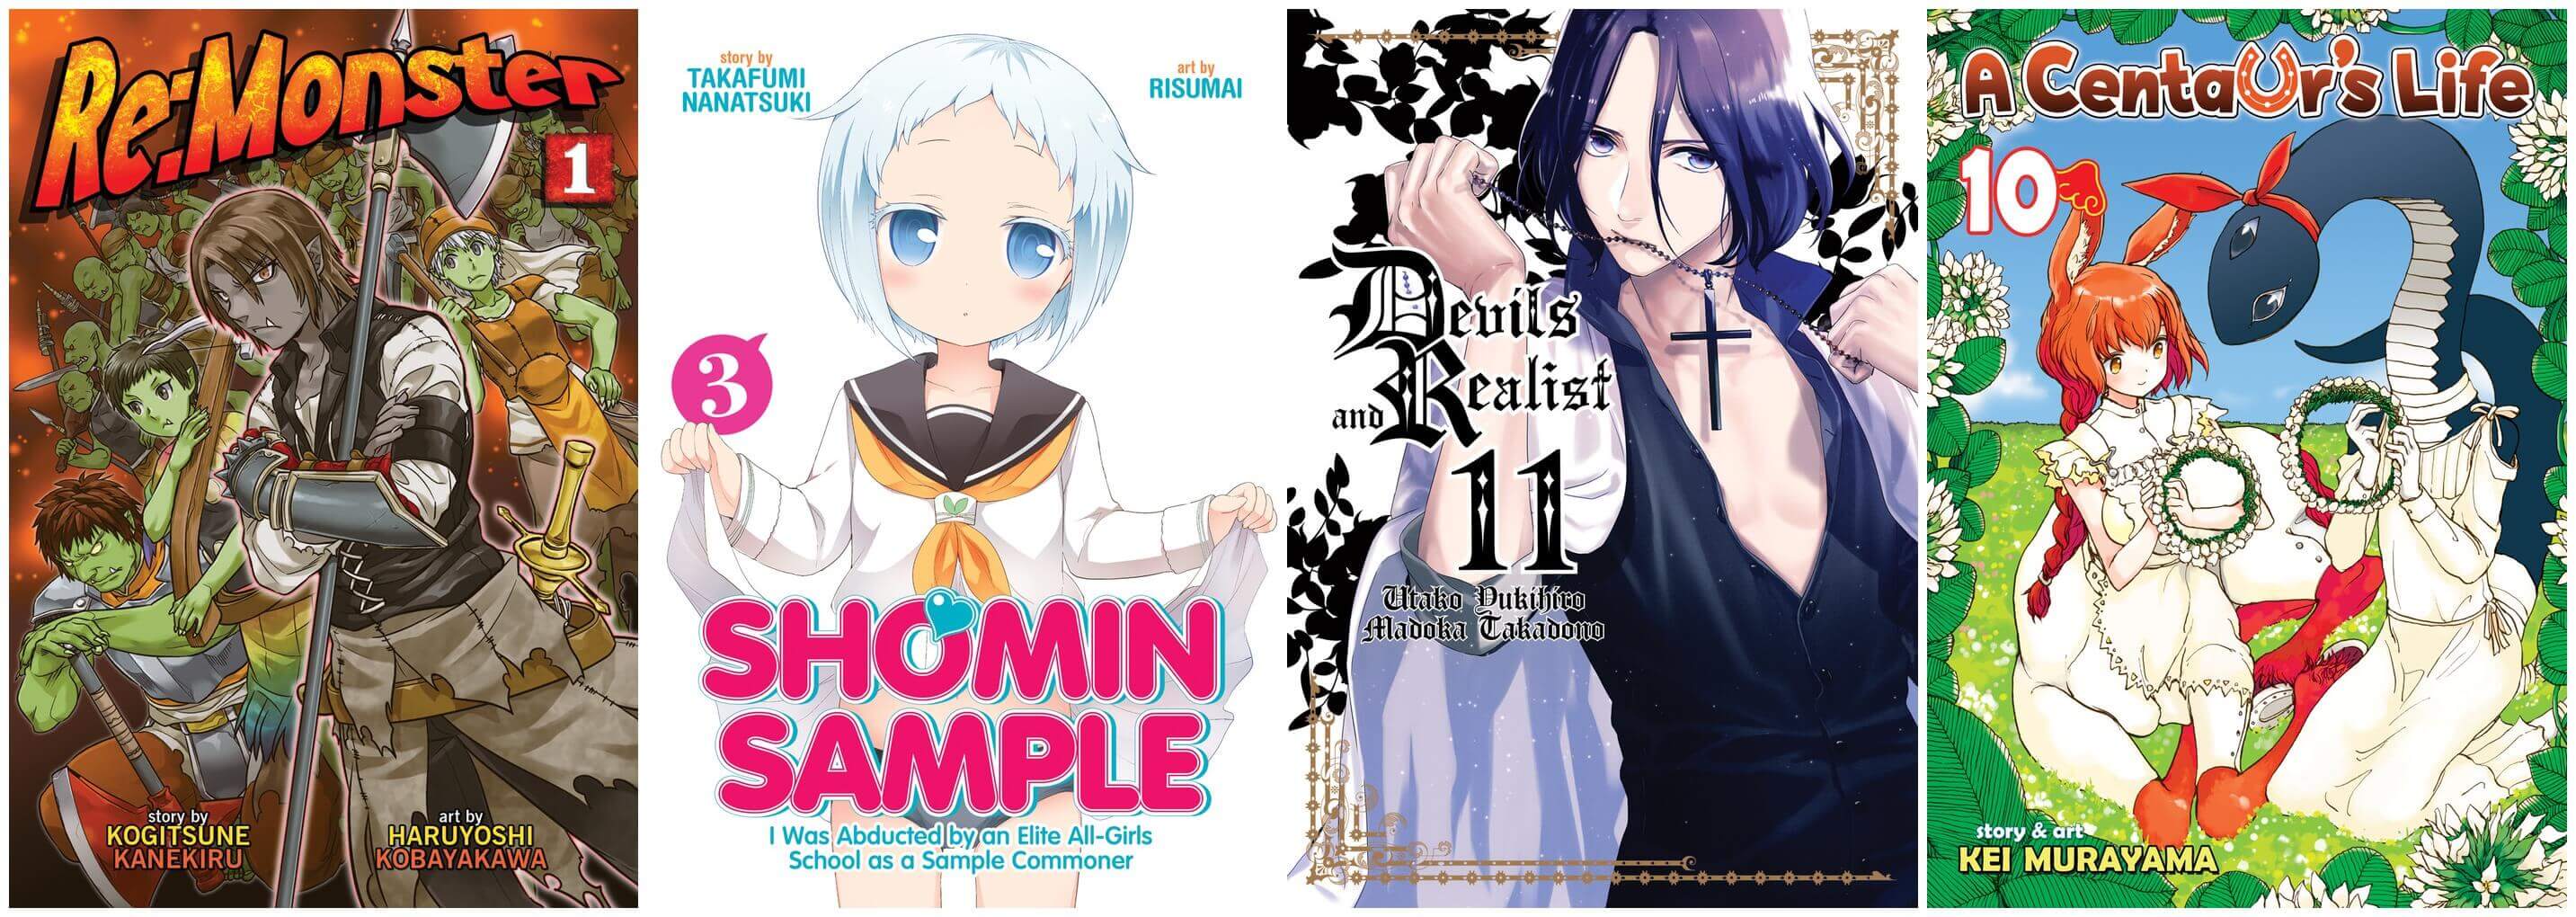 November 2016 Manga Releases Covers for Re:Monster, Shomin Sample, Devils and Realist, and A Centaur's Life.